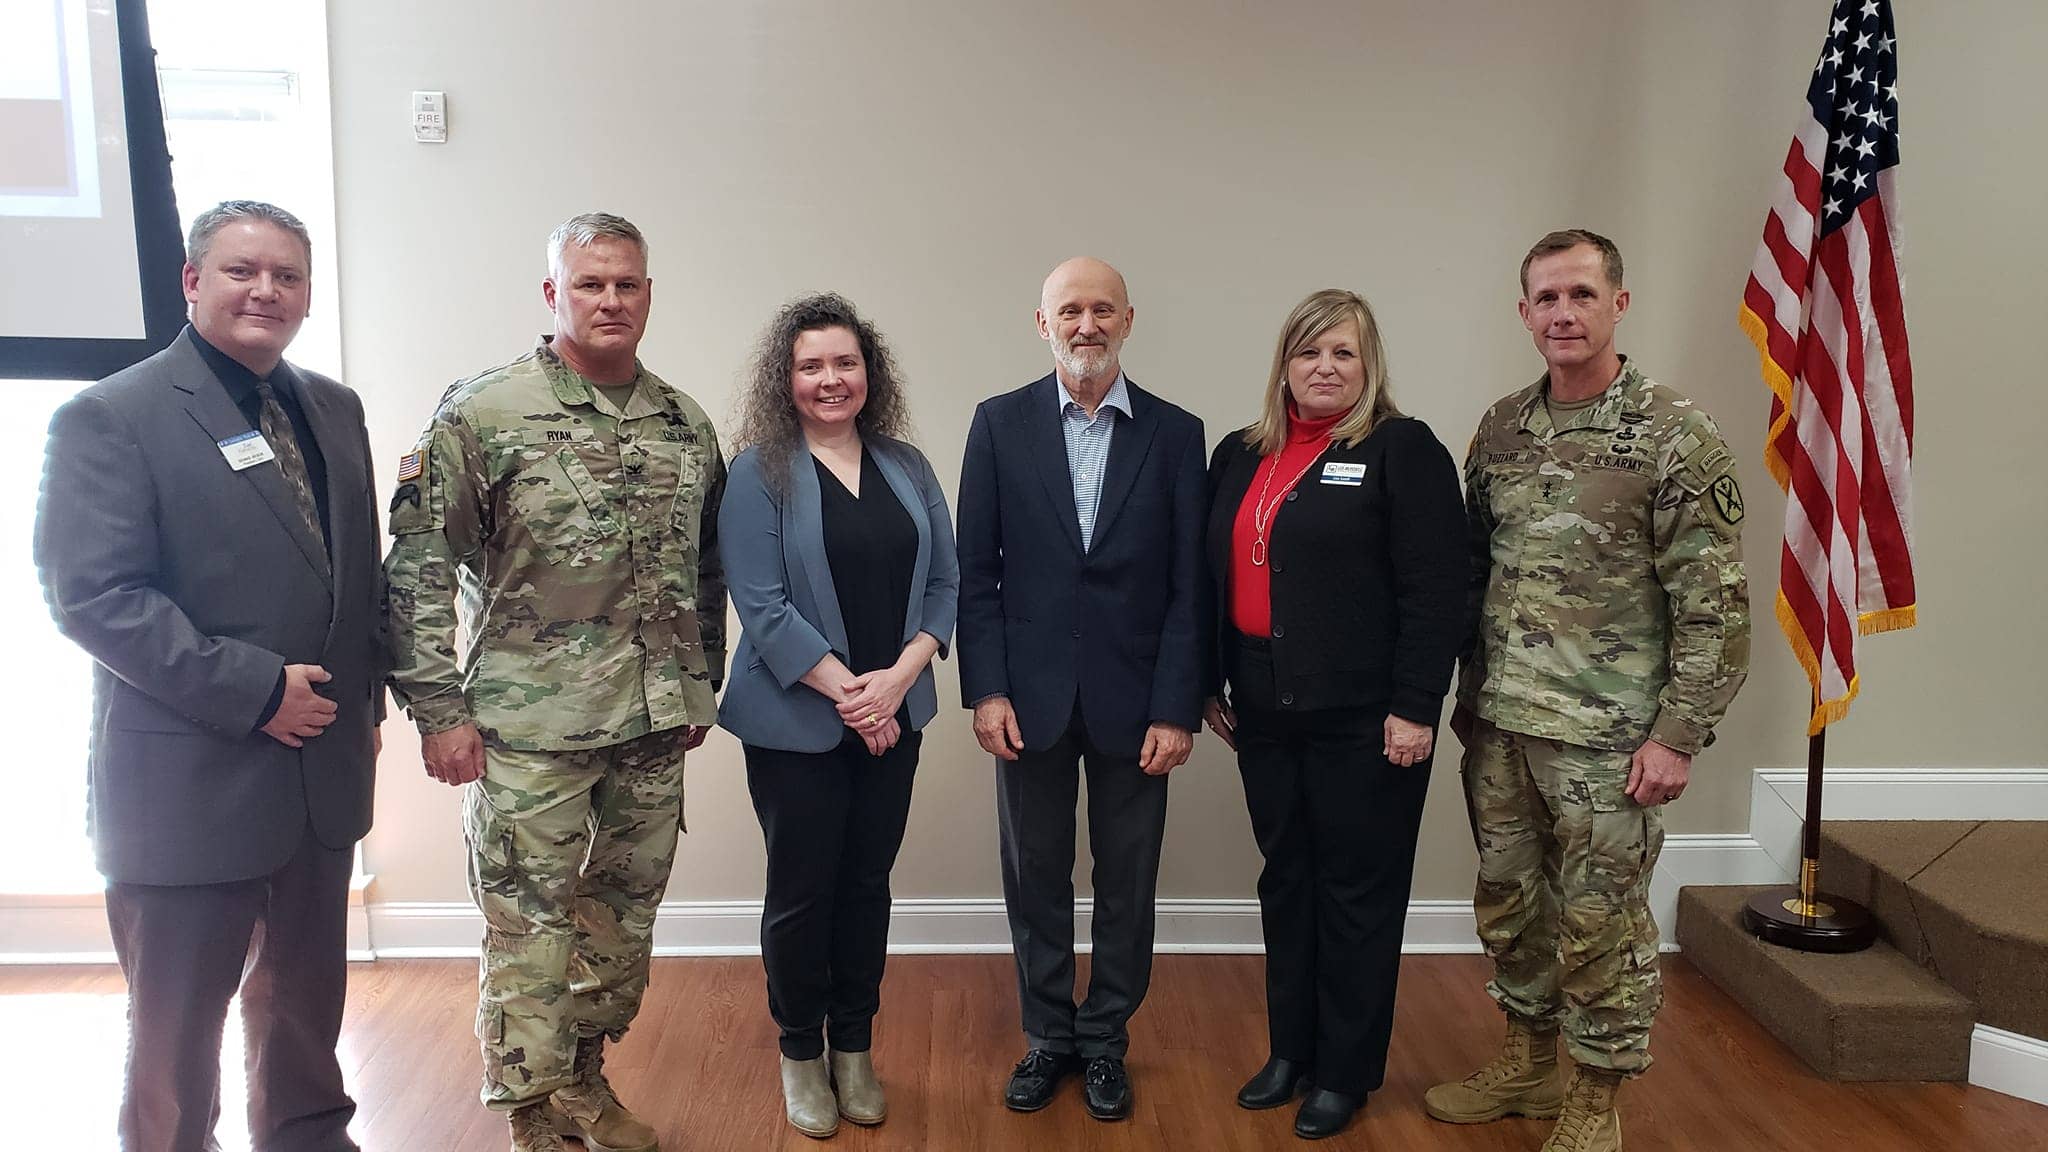 From left to right: East Alabama Chamber of Commerce CEO Dennis Beson, Colonel. Robert Ryan Fort Benning Robotics, Jennifer Holliday Alabama Military Family Liaison, Ted Maciuba Fort Benning Robotics Department, Executive Director of Lee Russell Council of Government Lisa Sandt, and Fort Benning Commanding General Curtis Buzzard